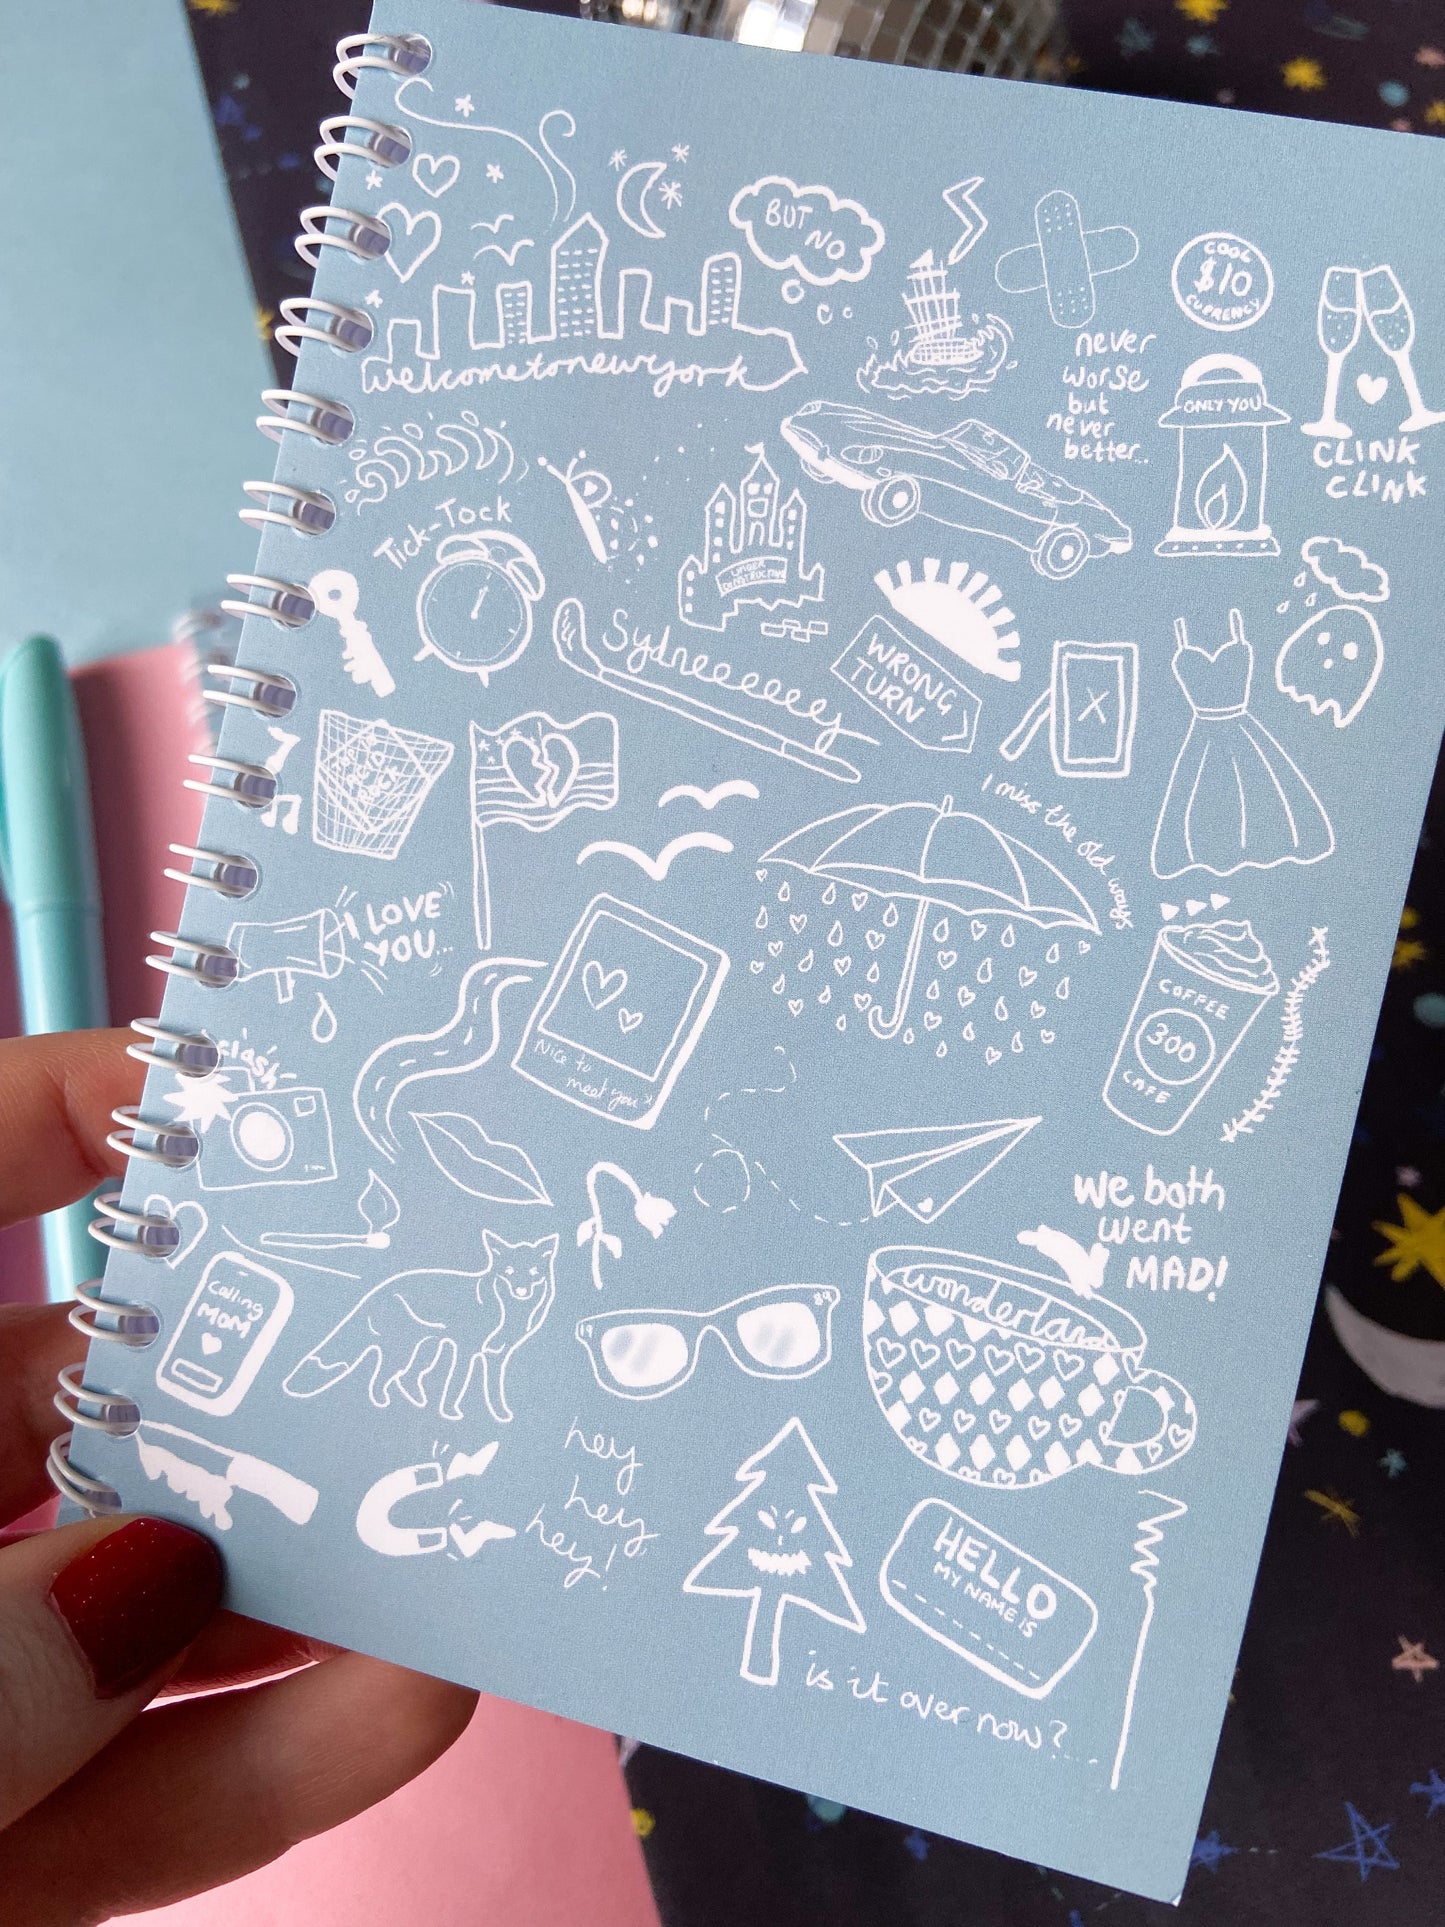 1989 Themed Notebook